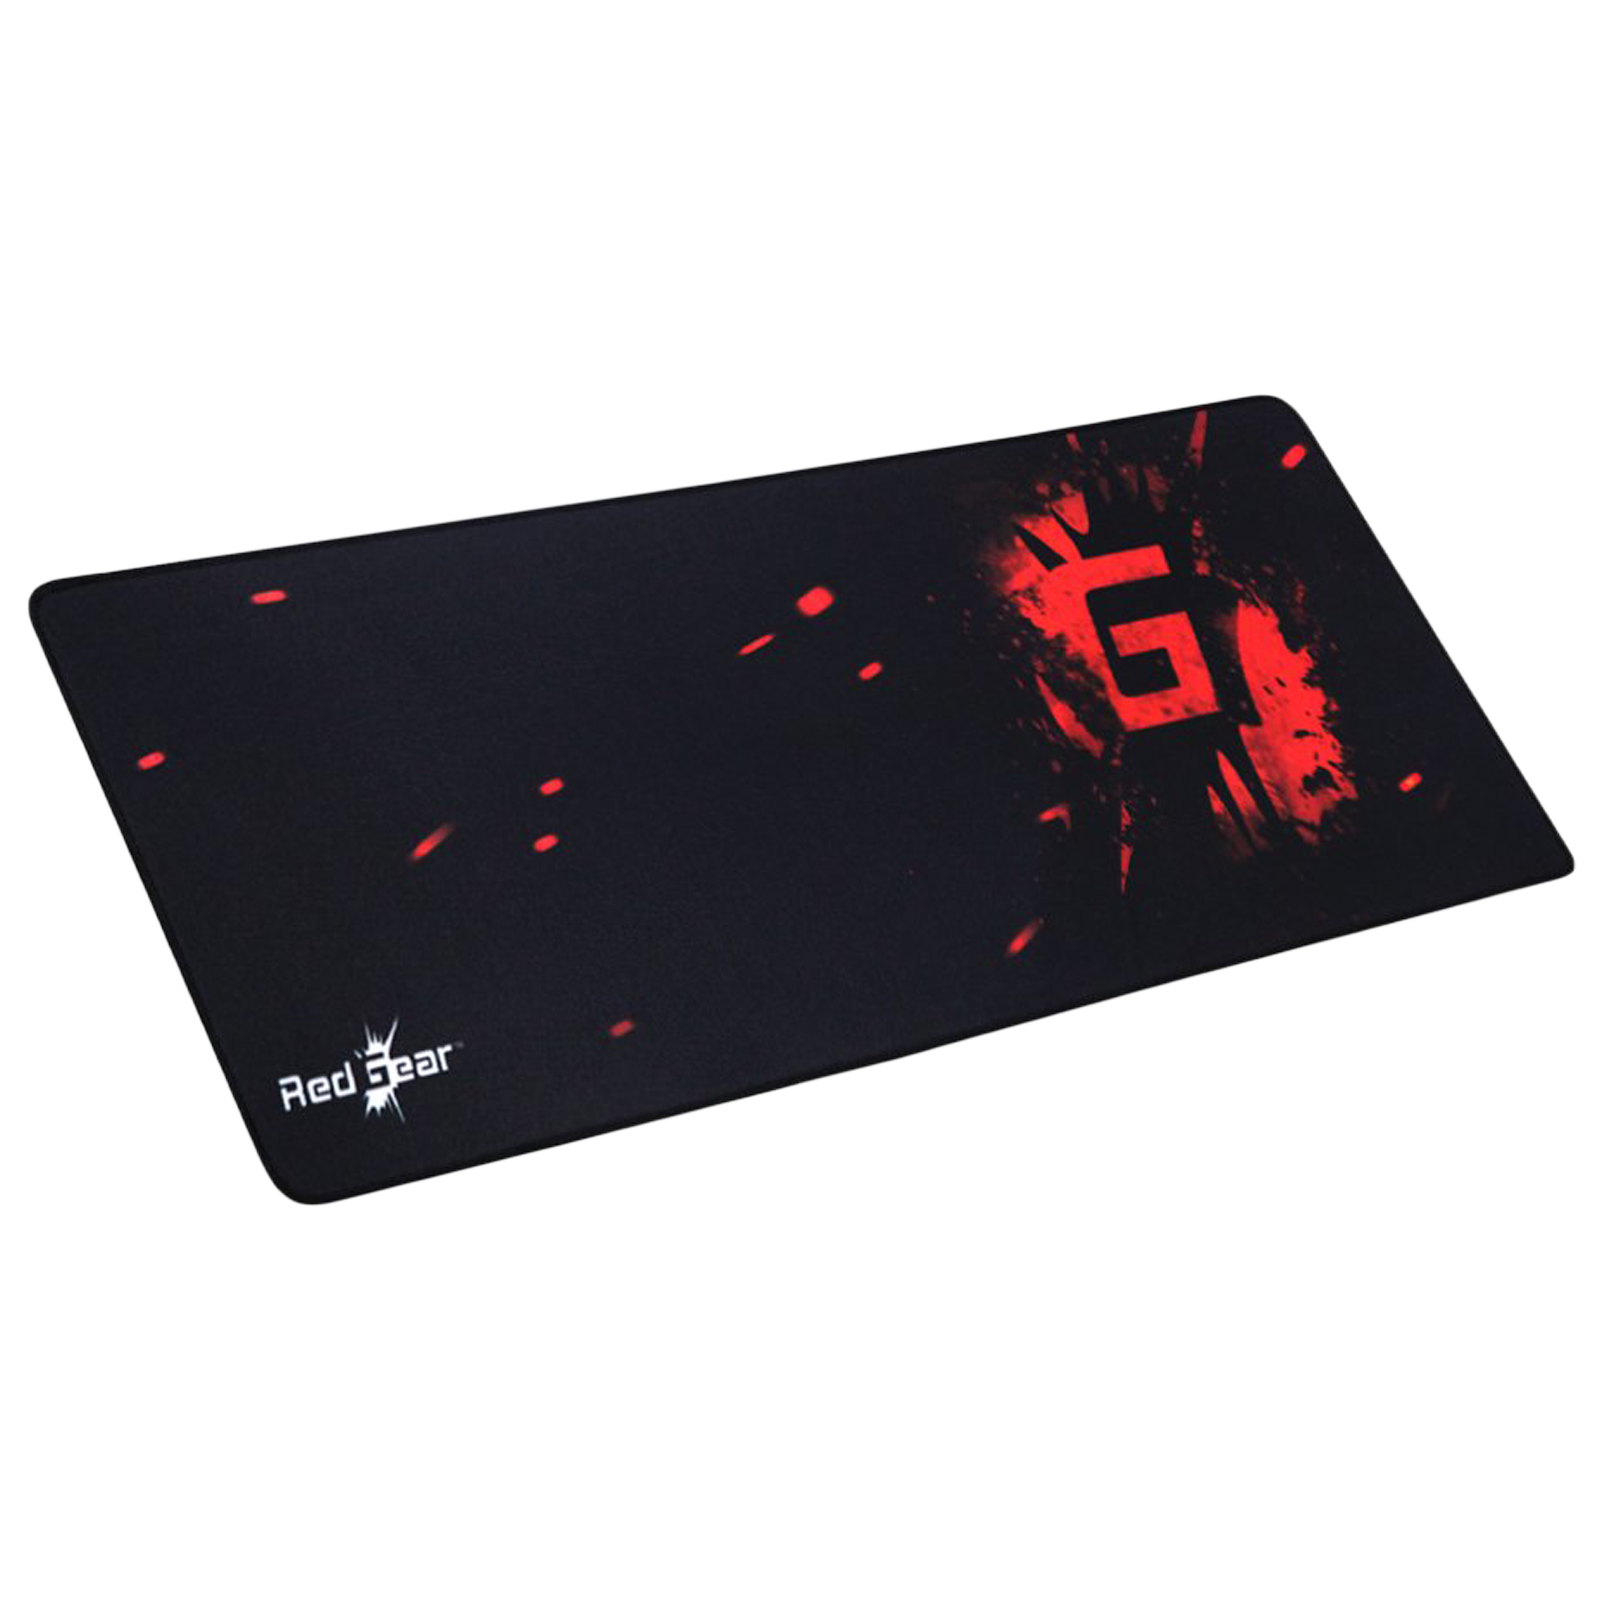 Redgear MP80 Gaming Mouse Pad (Soft And Durable, 8904130838156, Black)